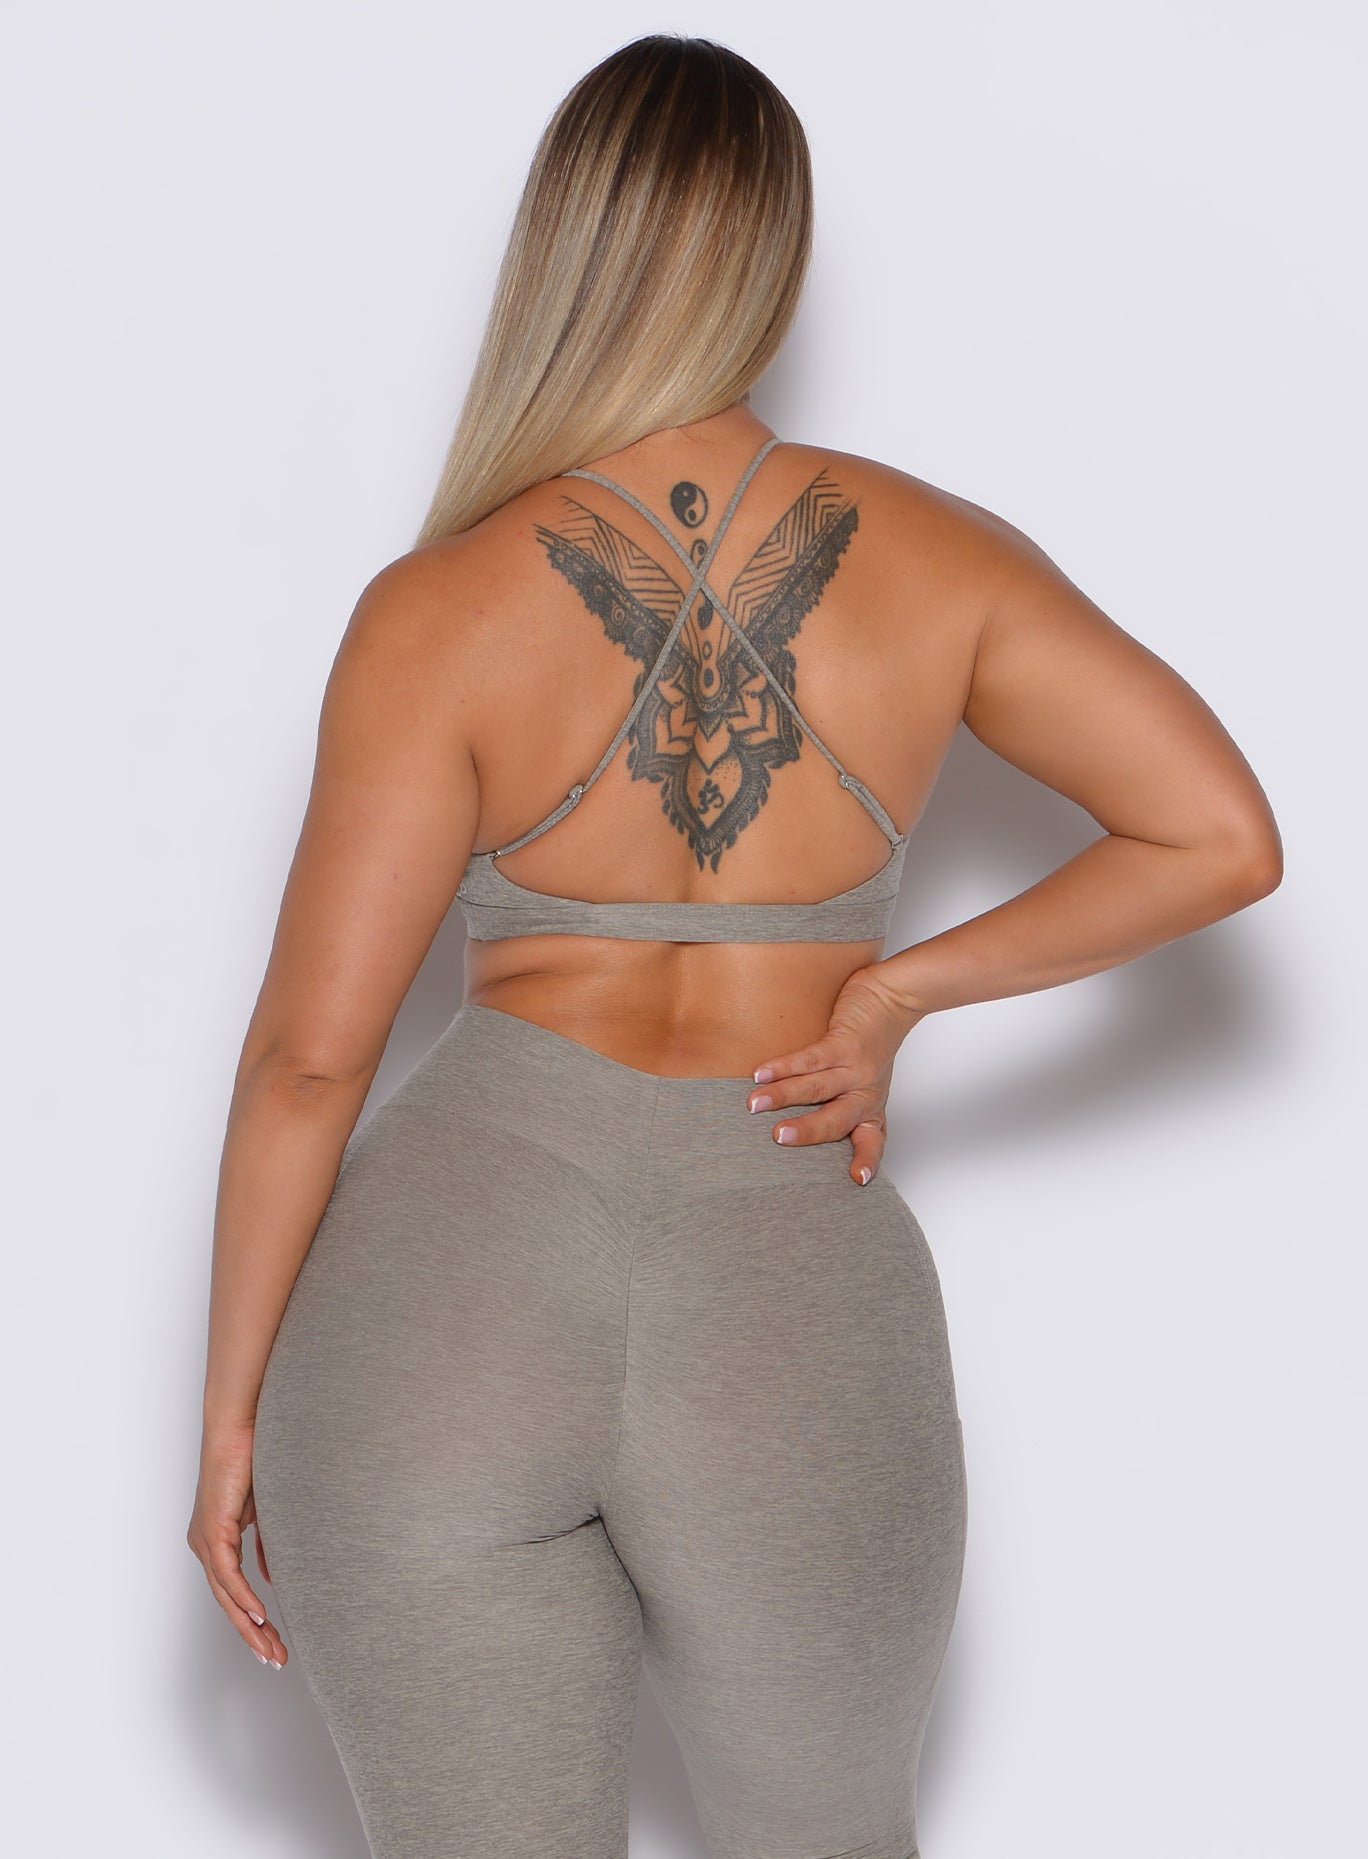 A back-profile picture of a model wearing our Twist sports bra in Nori color, along with the matching leggings.